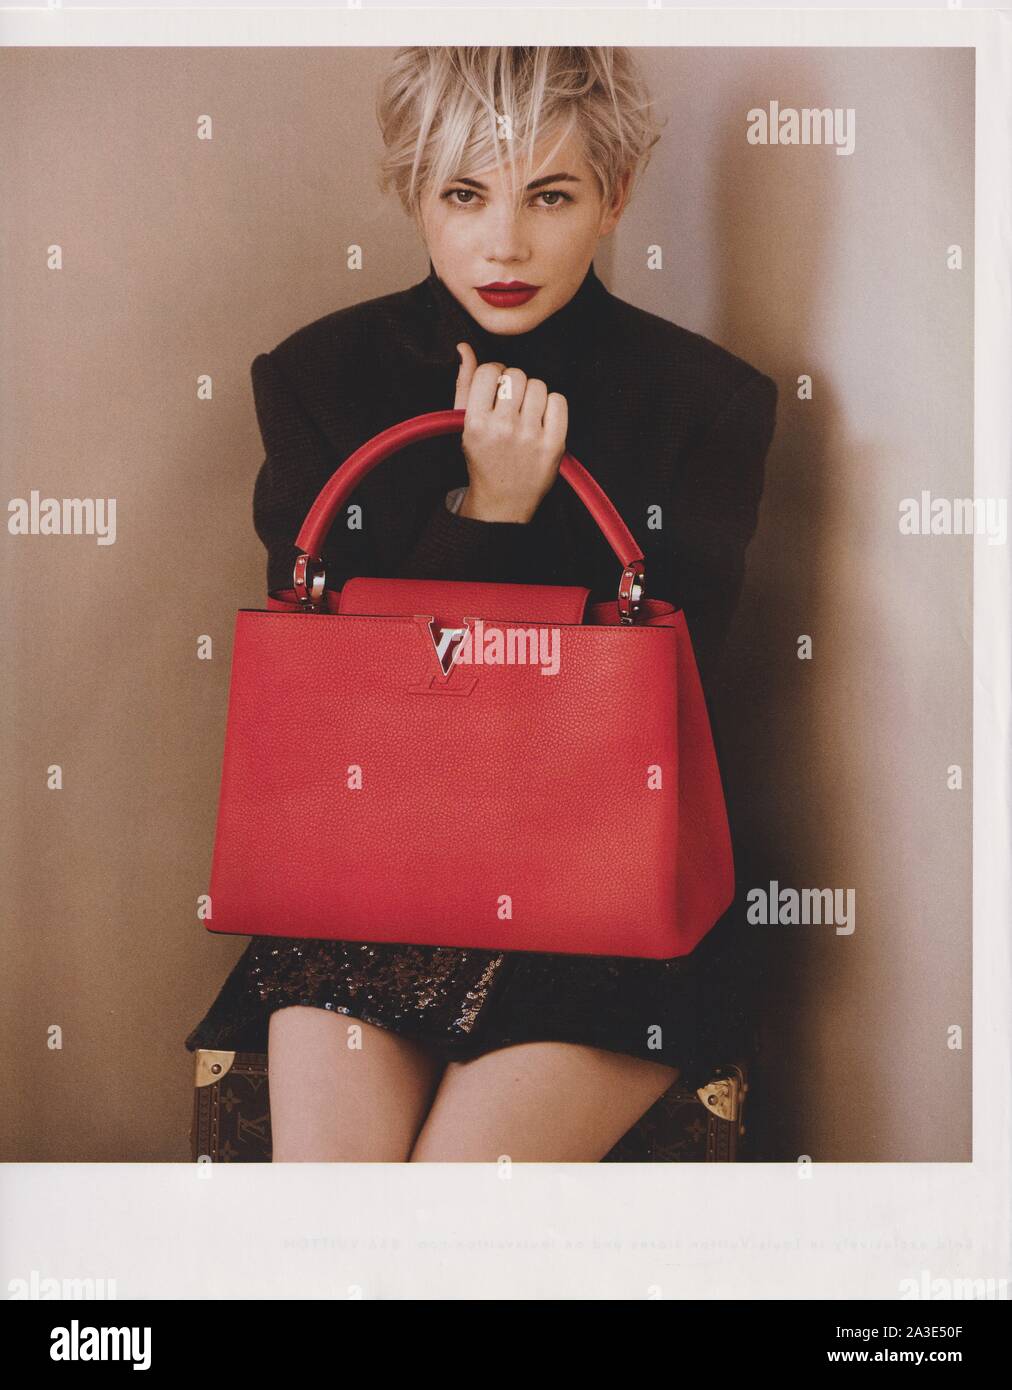 poster advertising Louis Vuitton handbag with Michelle Williams actress in  paper magazine from 2015, advertisement, creative advert from 2010s Stock  Photo - Alamy